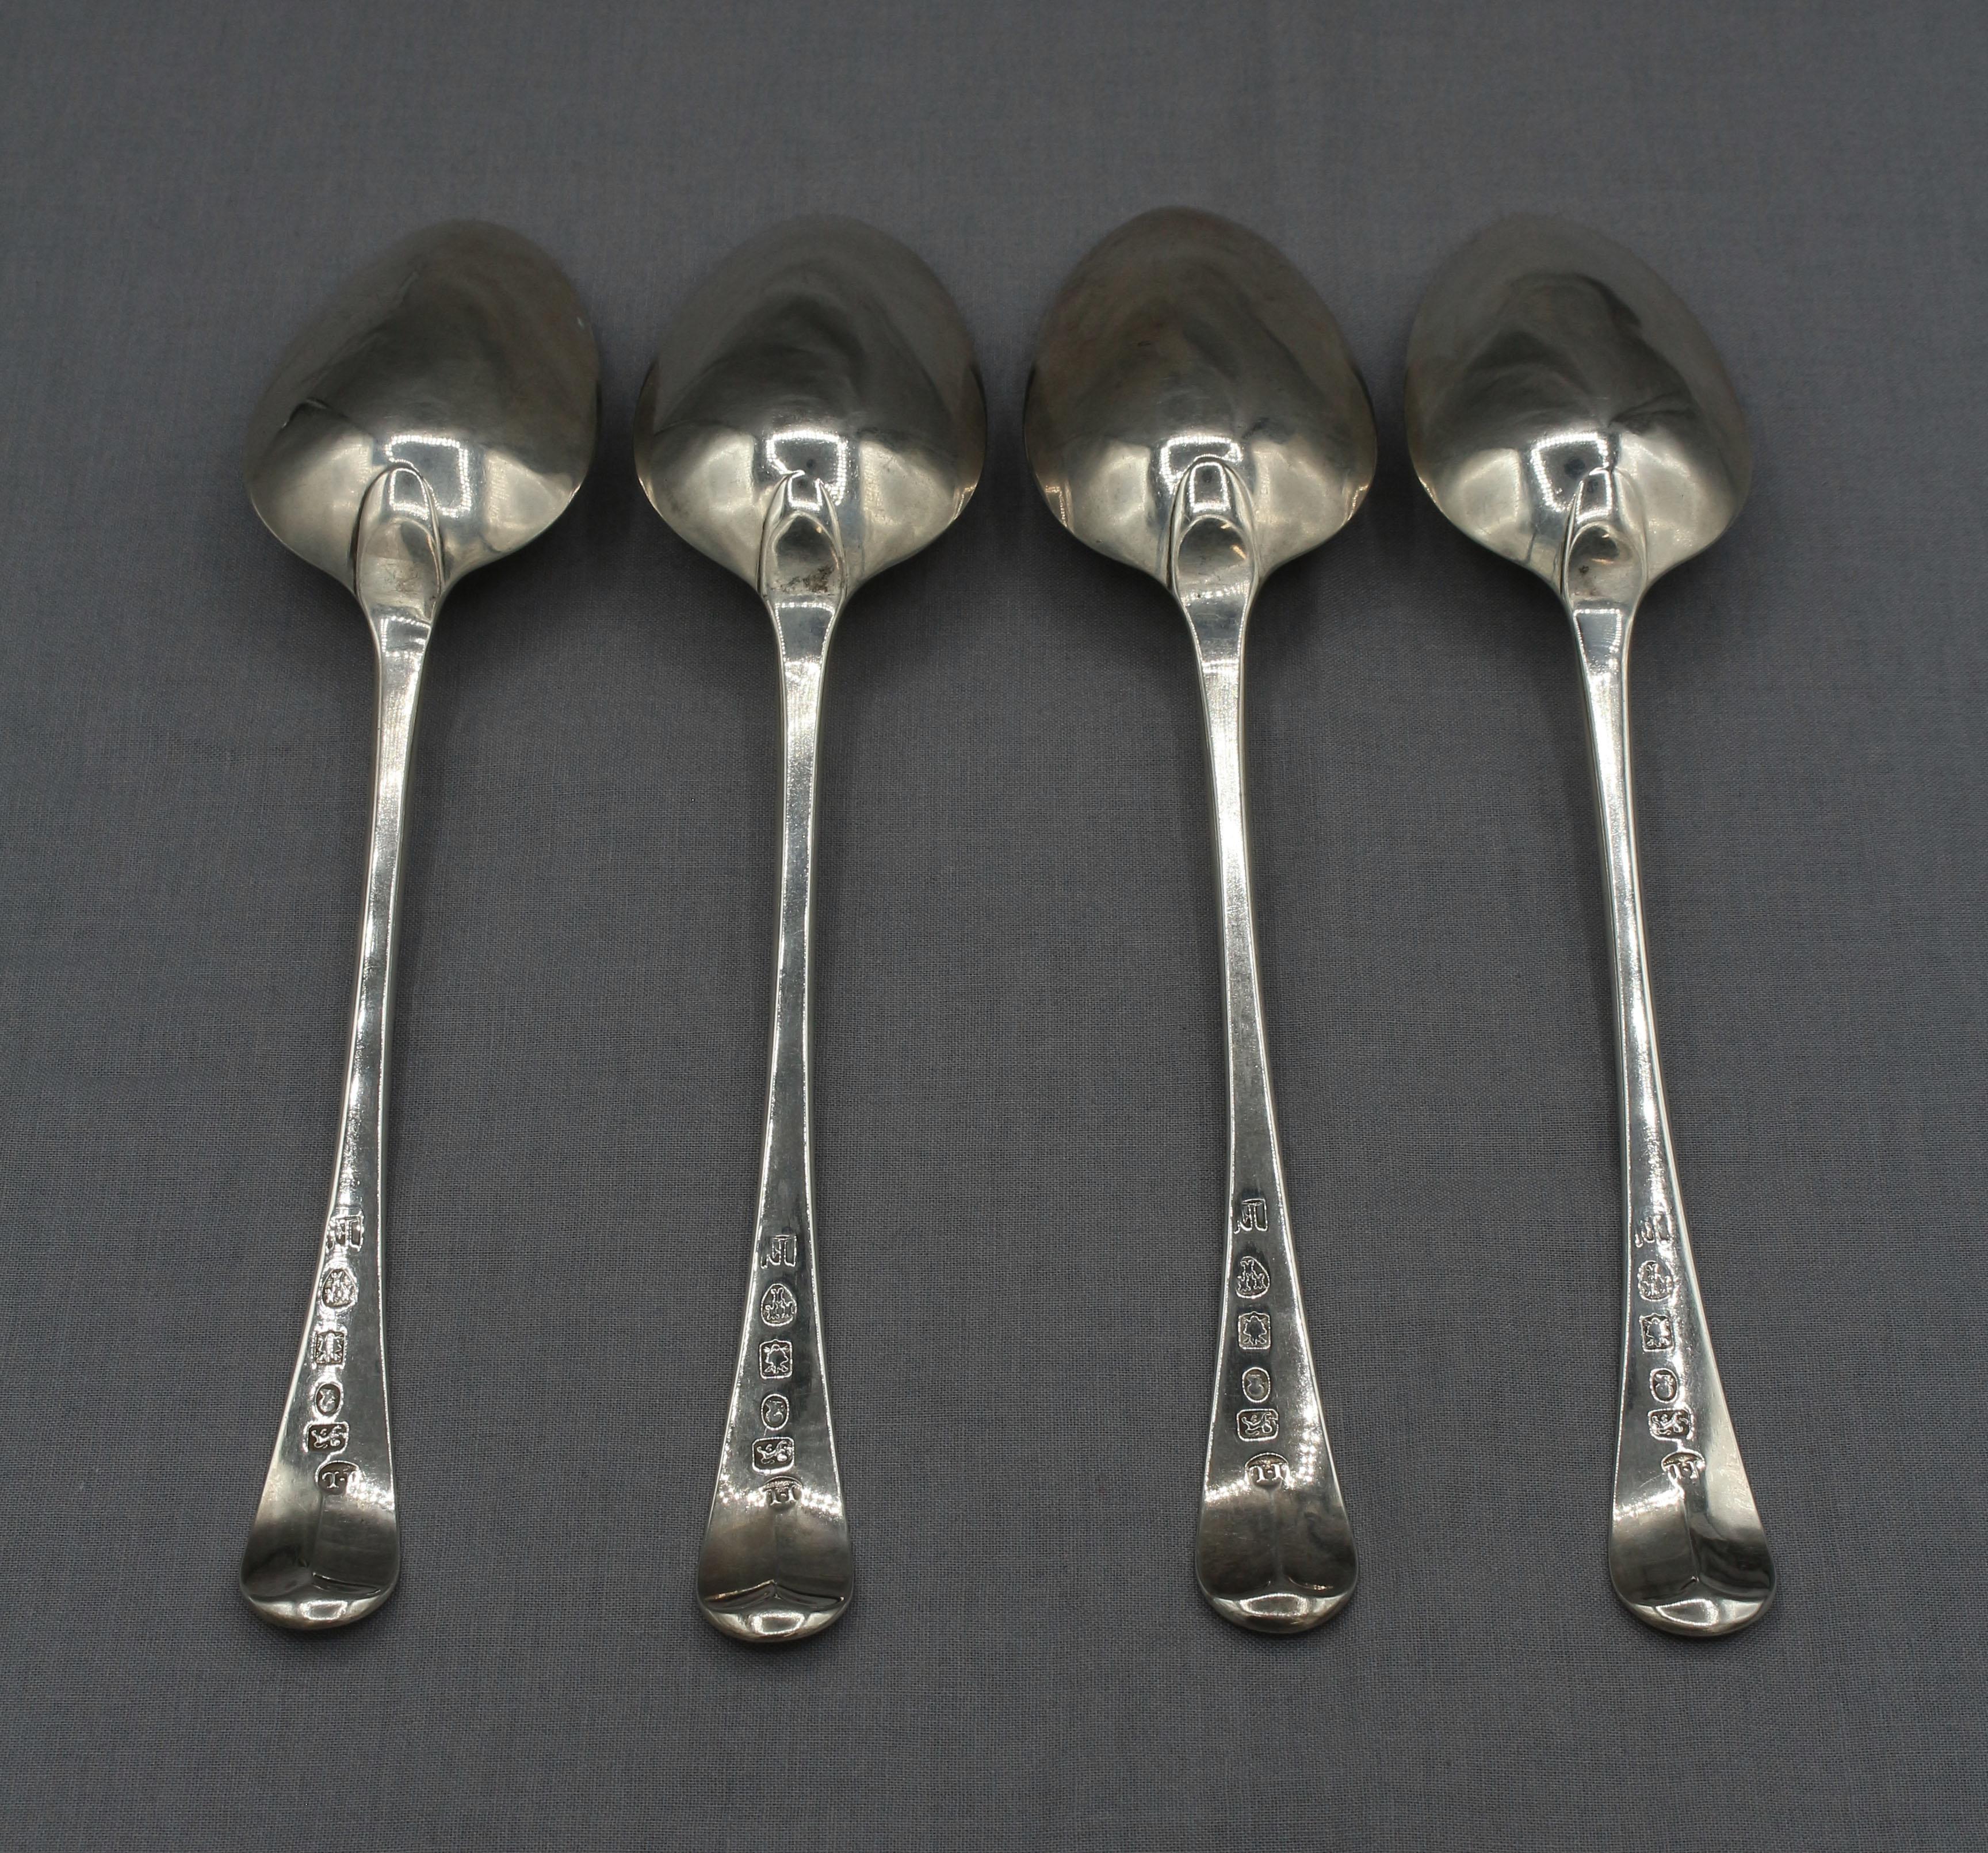 Set of 4 sterling silver tablespoons by John Langlands II, Newcastle, 1796, England. Handsome & rarely found. Old English pattern. Crisply pointed bowls. Possible monogram erasure. A continuation of a 60 year business, the largest in Newcastle from